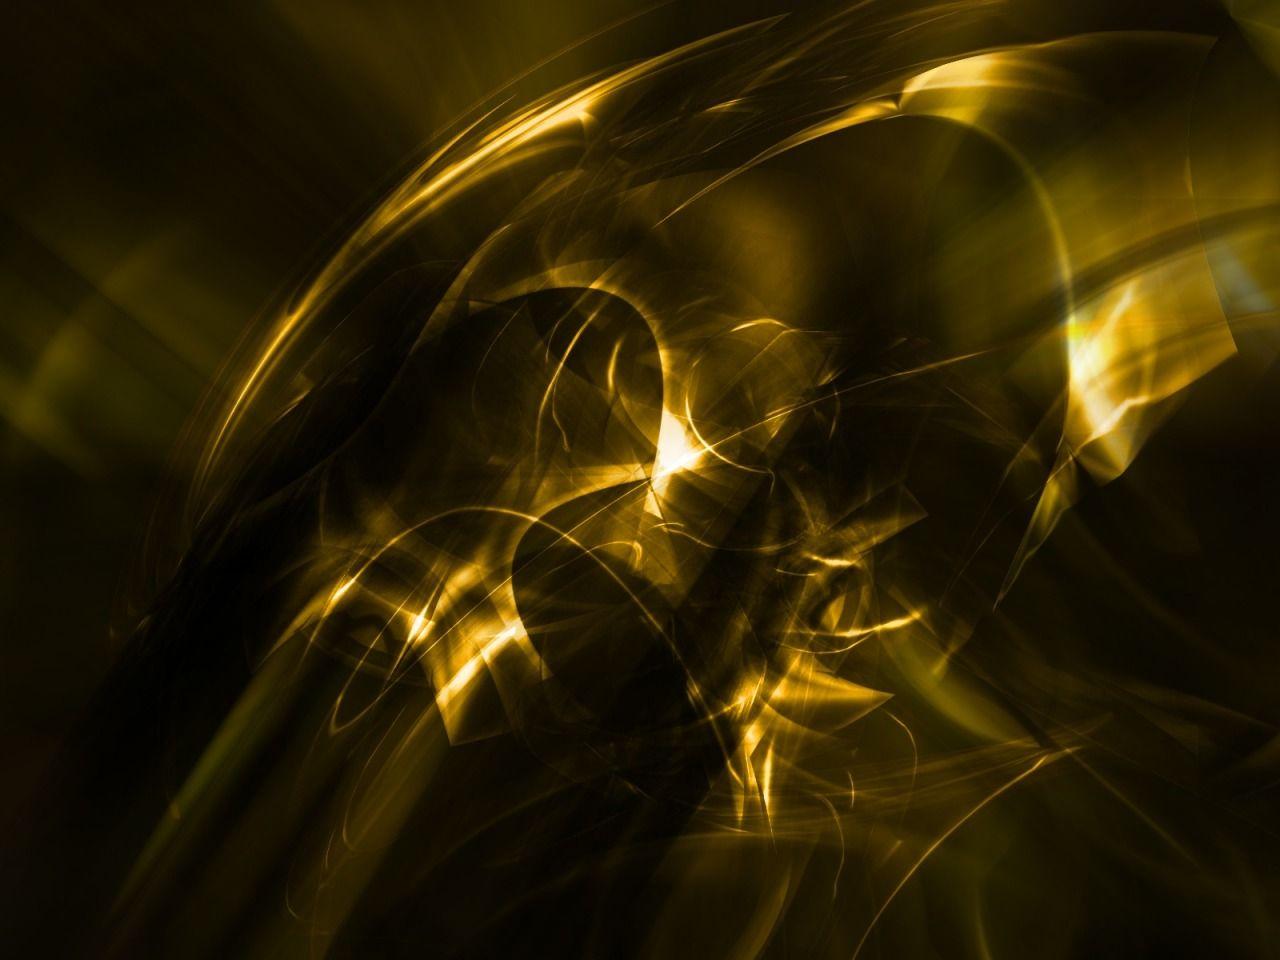 Black and Gold Abstract Wallpapers - Top Free Black and Gold Abstract